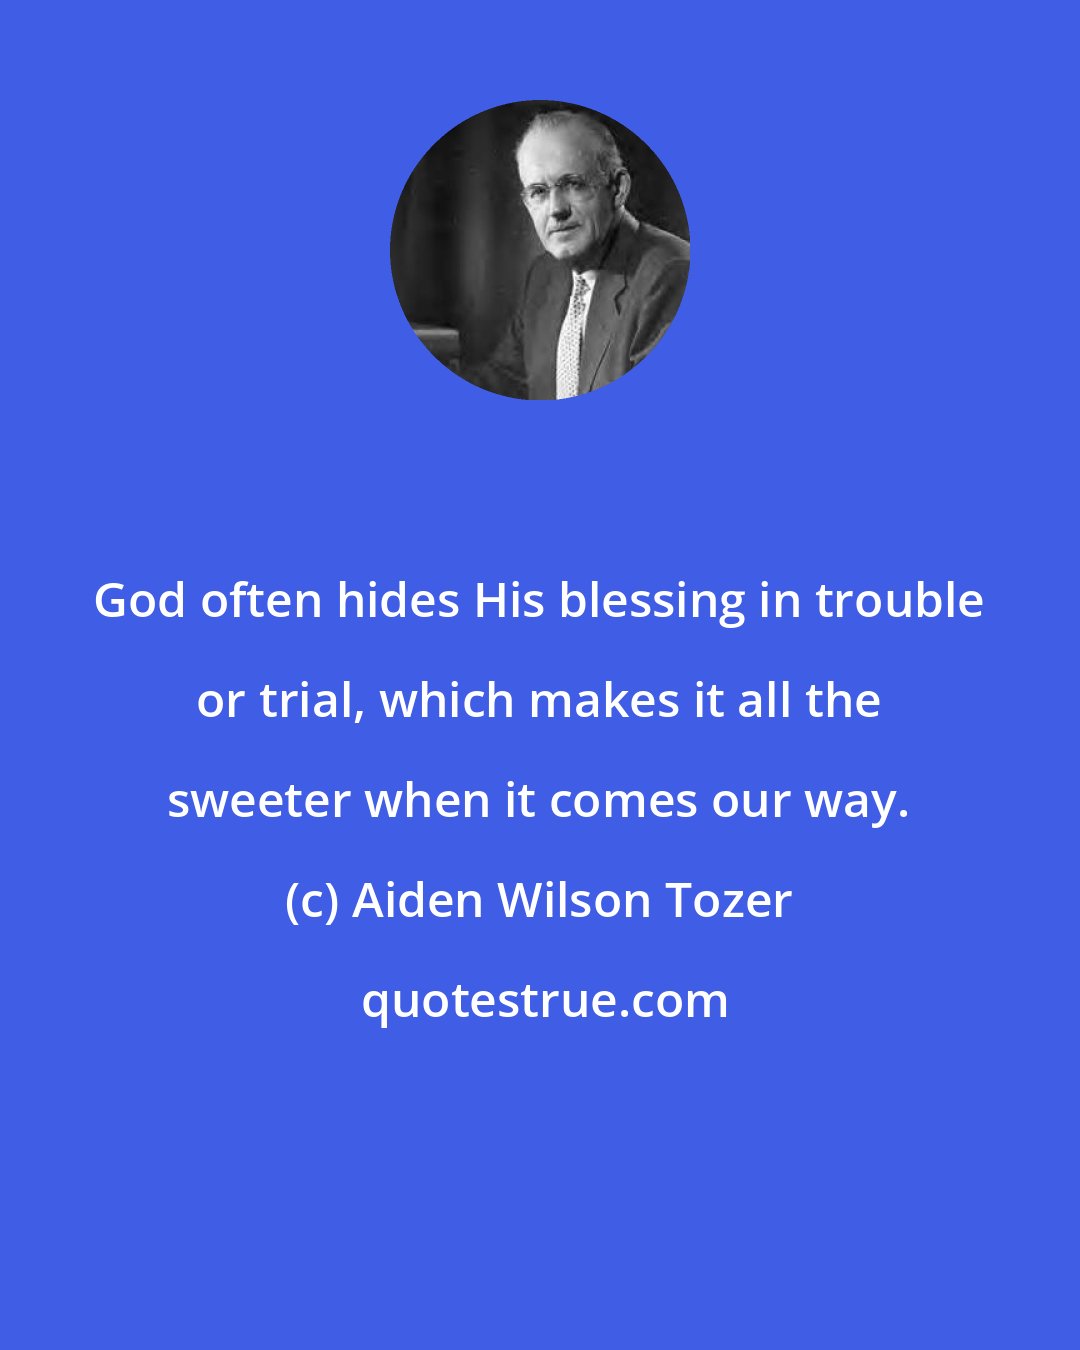 Aiden Wilson Tozer: God often hides His blessing in trouble or trial, which makes it all the sweeter when it comes our way.